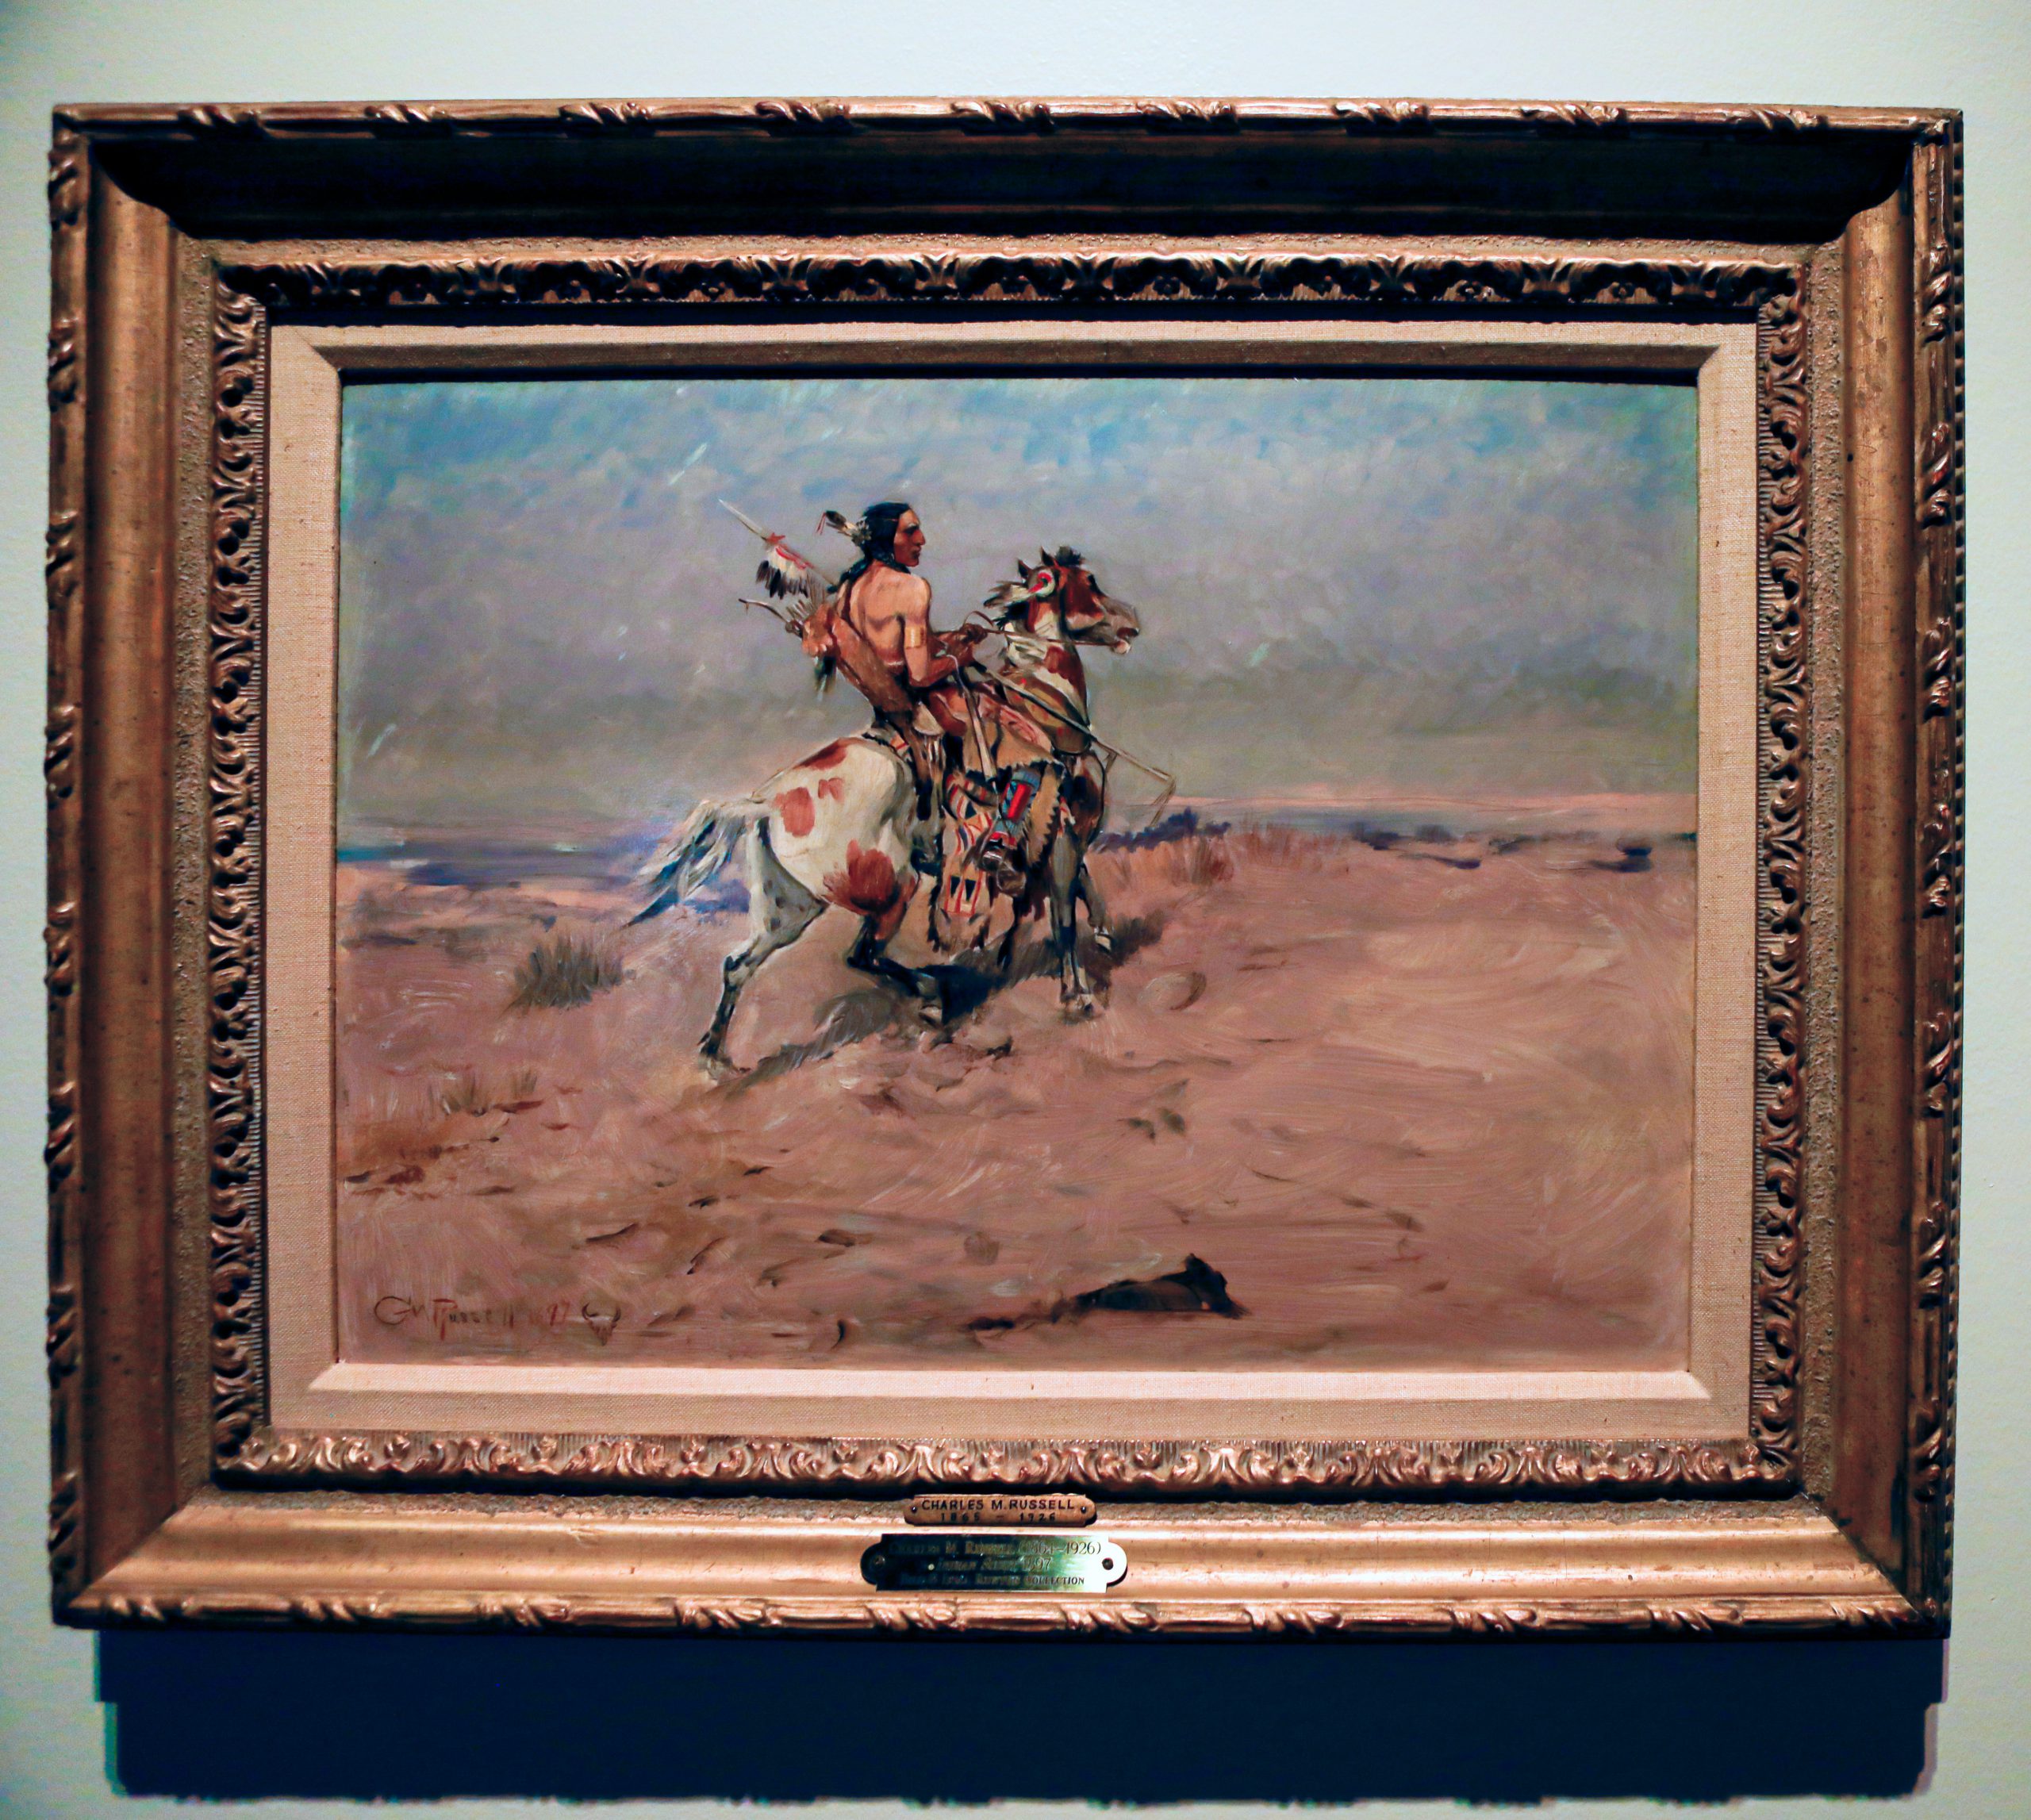 Oil painting of a Native American on horseback. This image shows the painting as it would look under modern lighting.